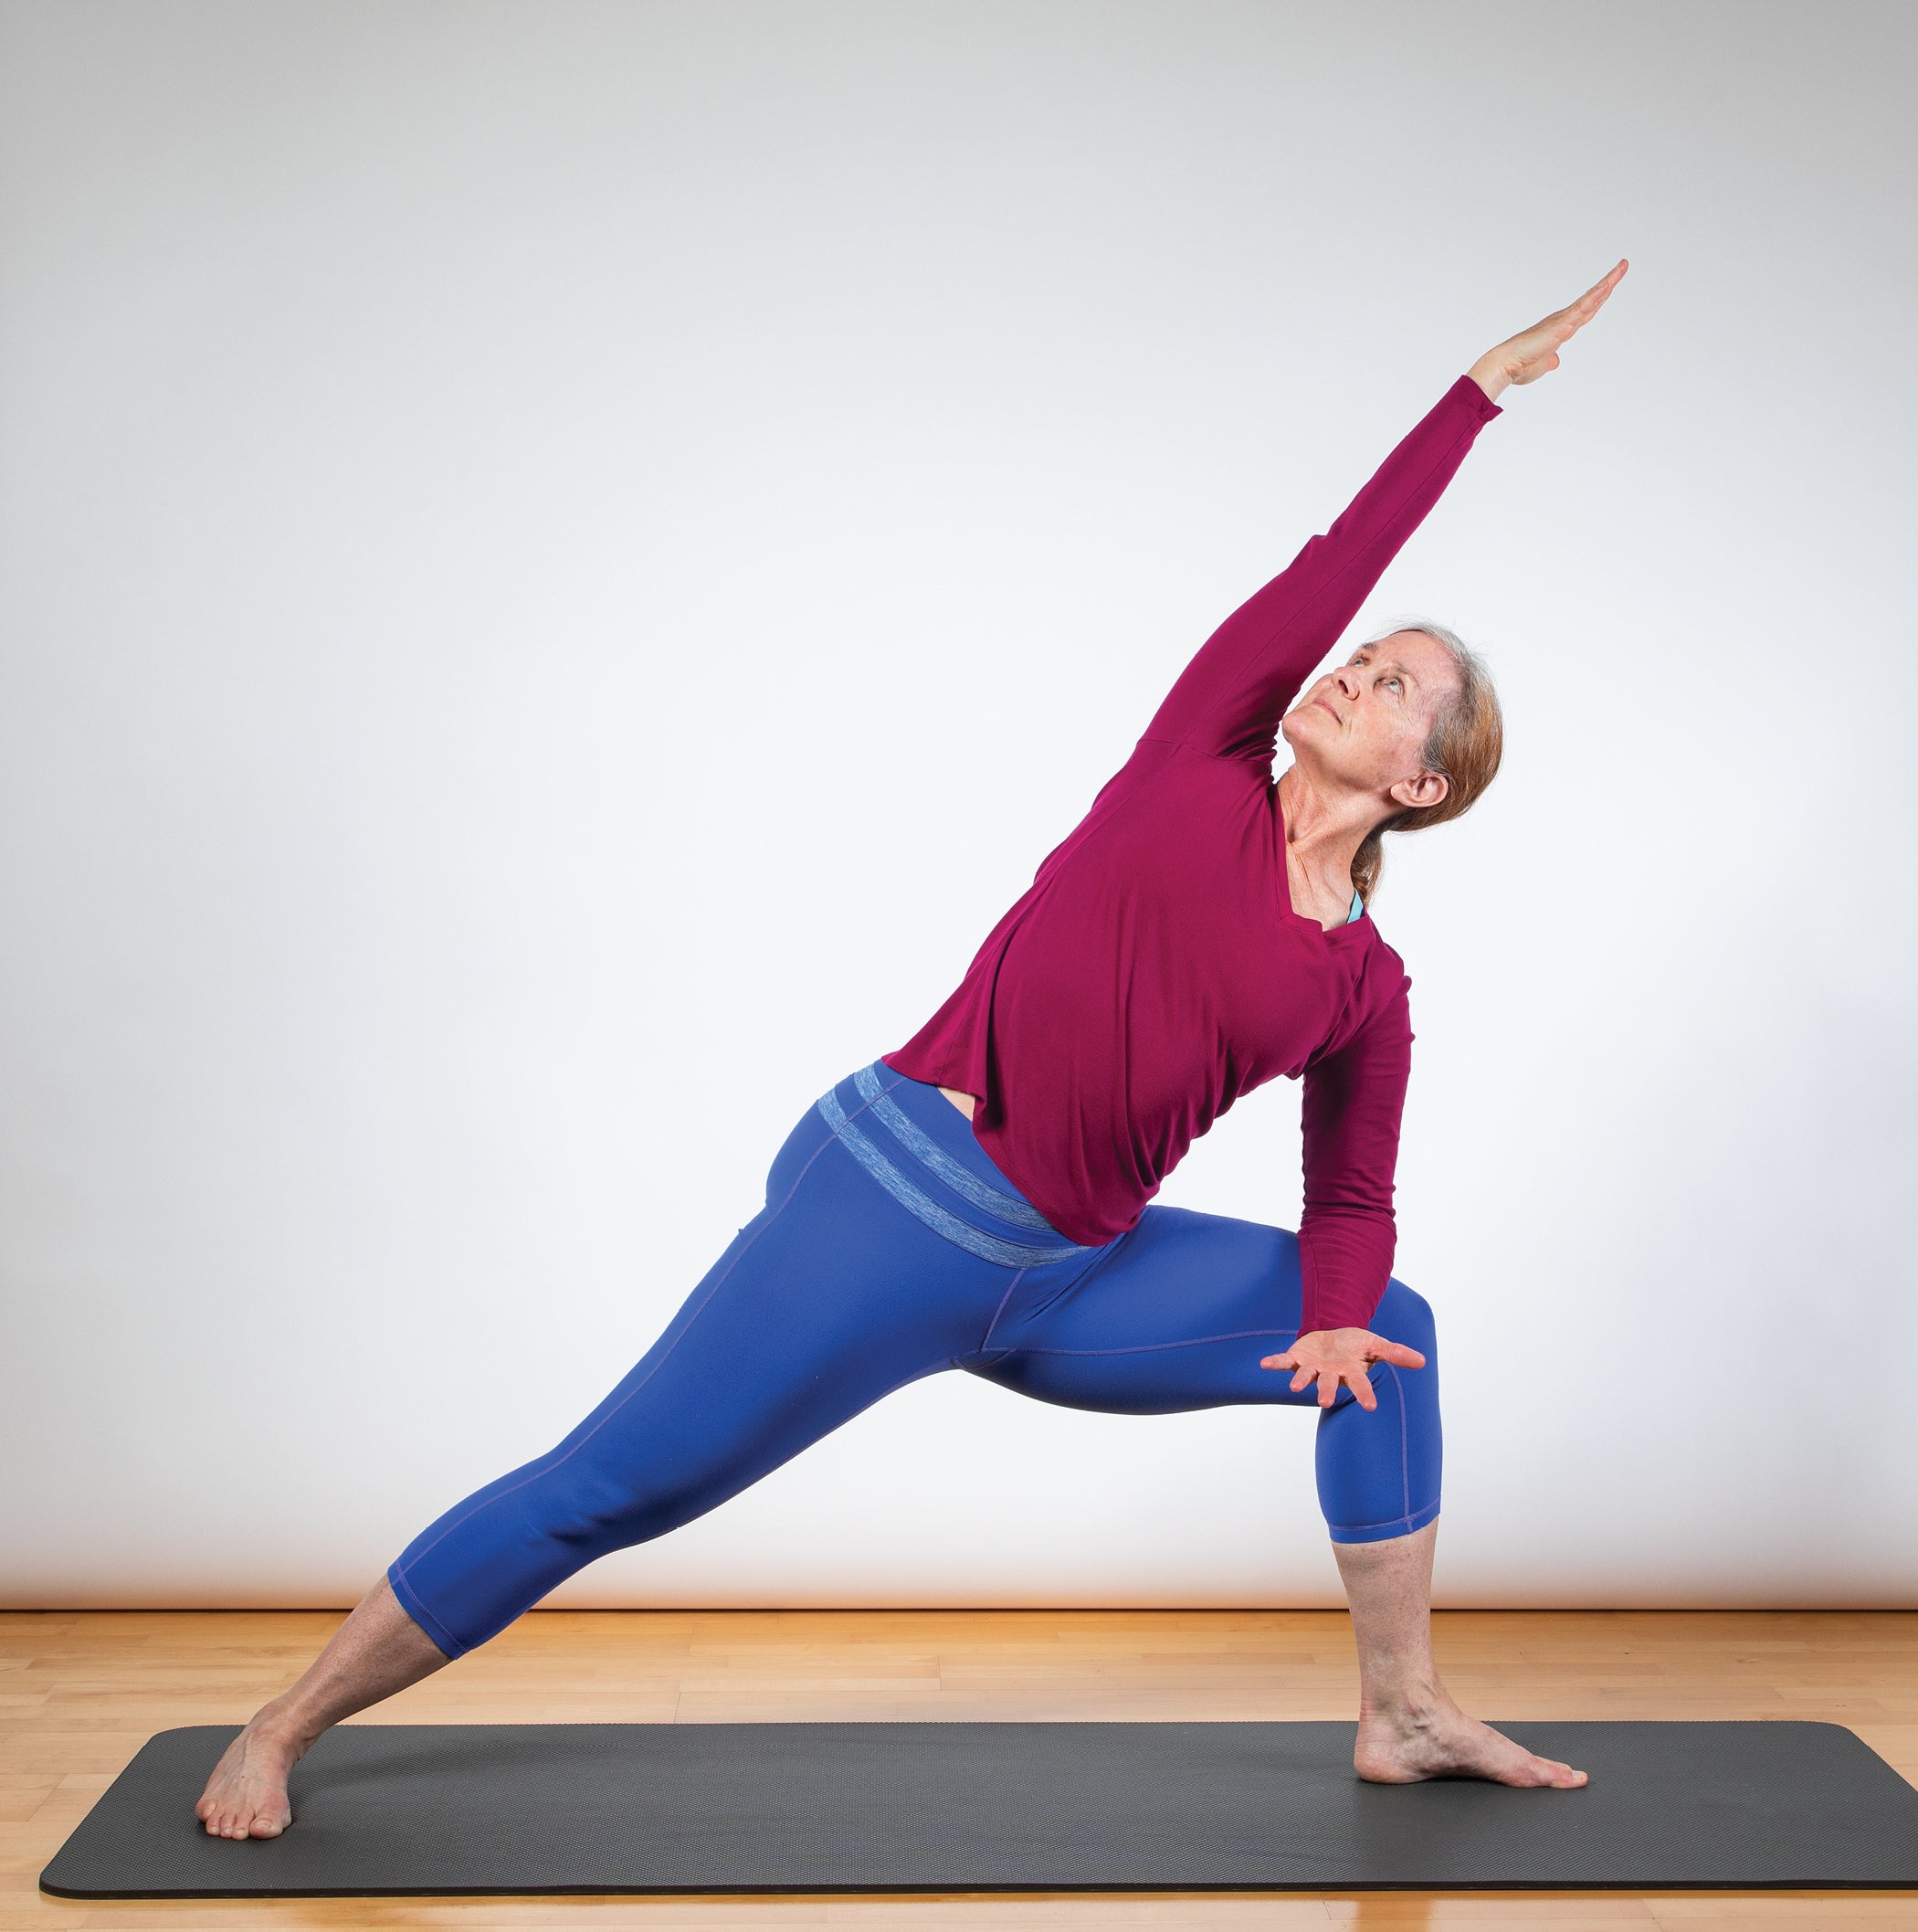 Detox Yoga: 9 Poses and How They Help